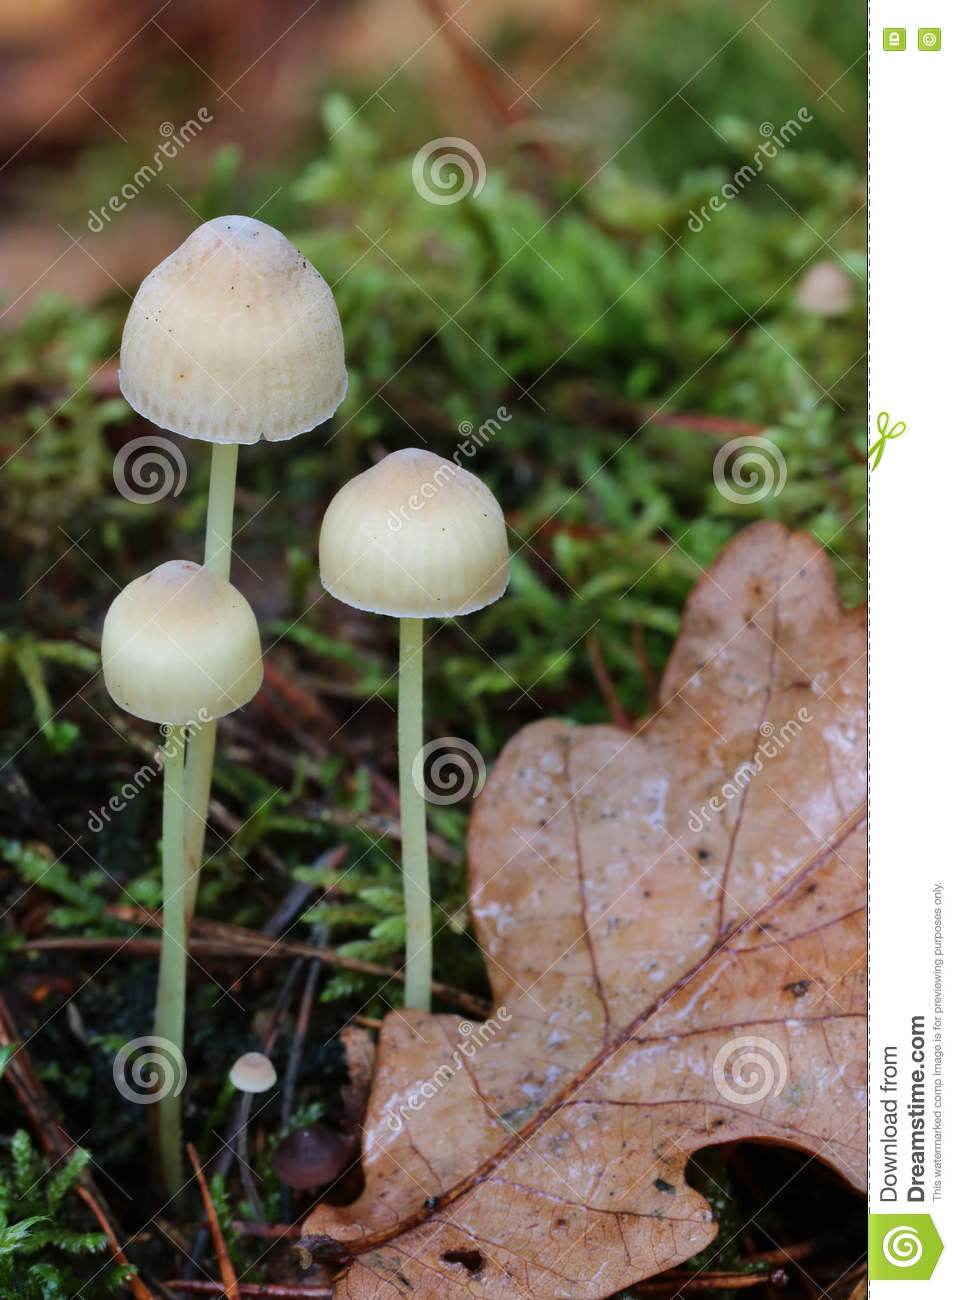 Small White Mushrooms
 A Triplet Small White Mushrooms To her Stock Image